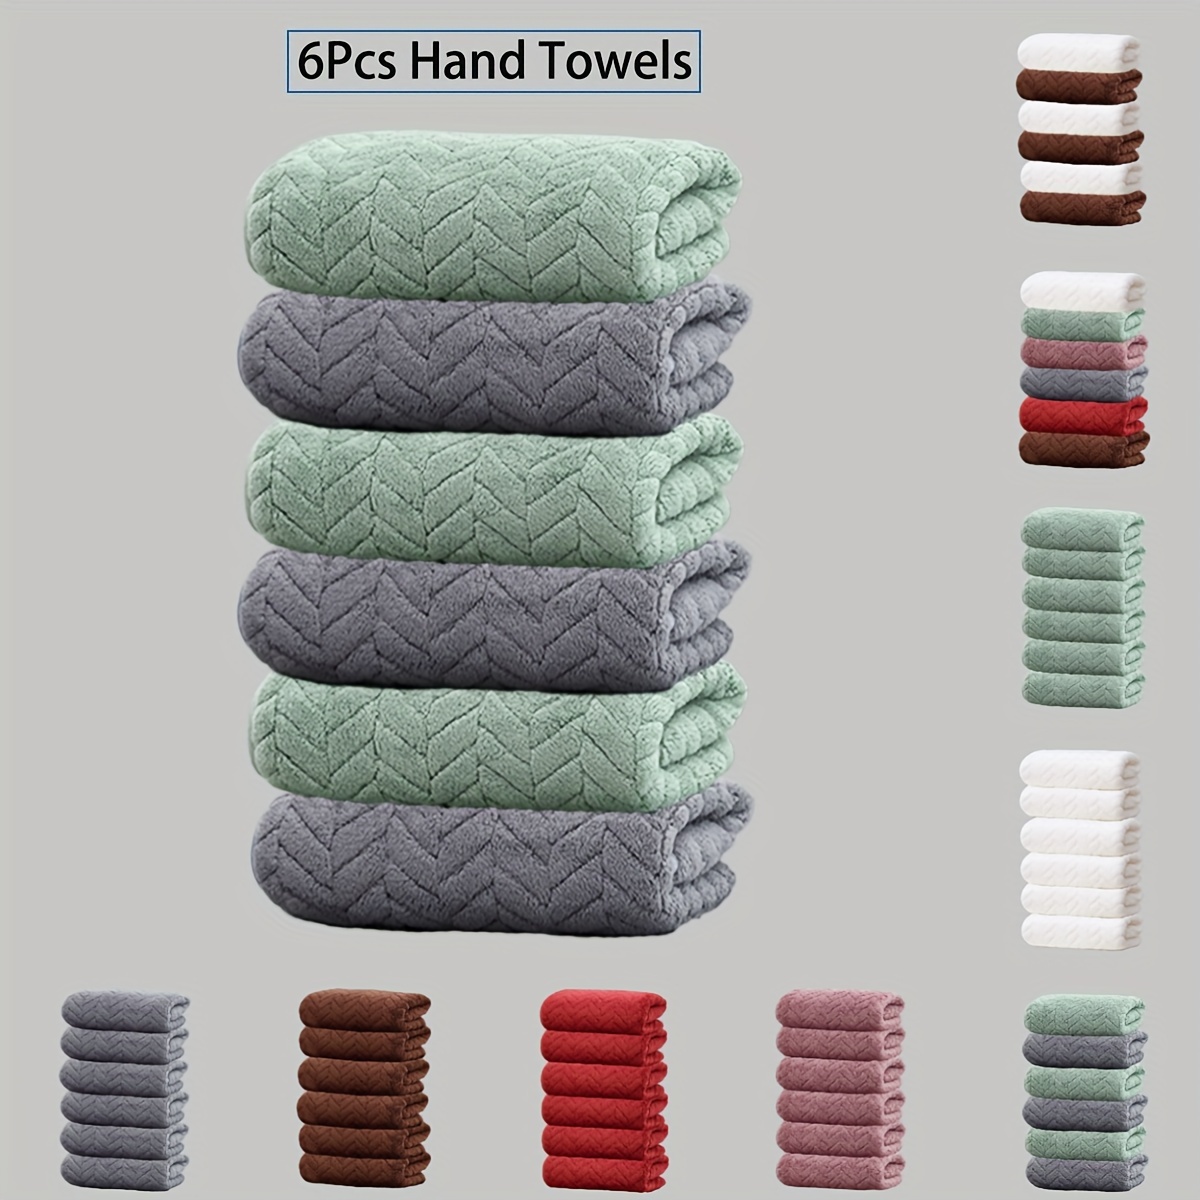 

6pcs Coral Velvet Hand Towel Set, Soft And Comfortable, Good Water Absorption, Bathroom Supplies, Kitchen Hand Towels